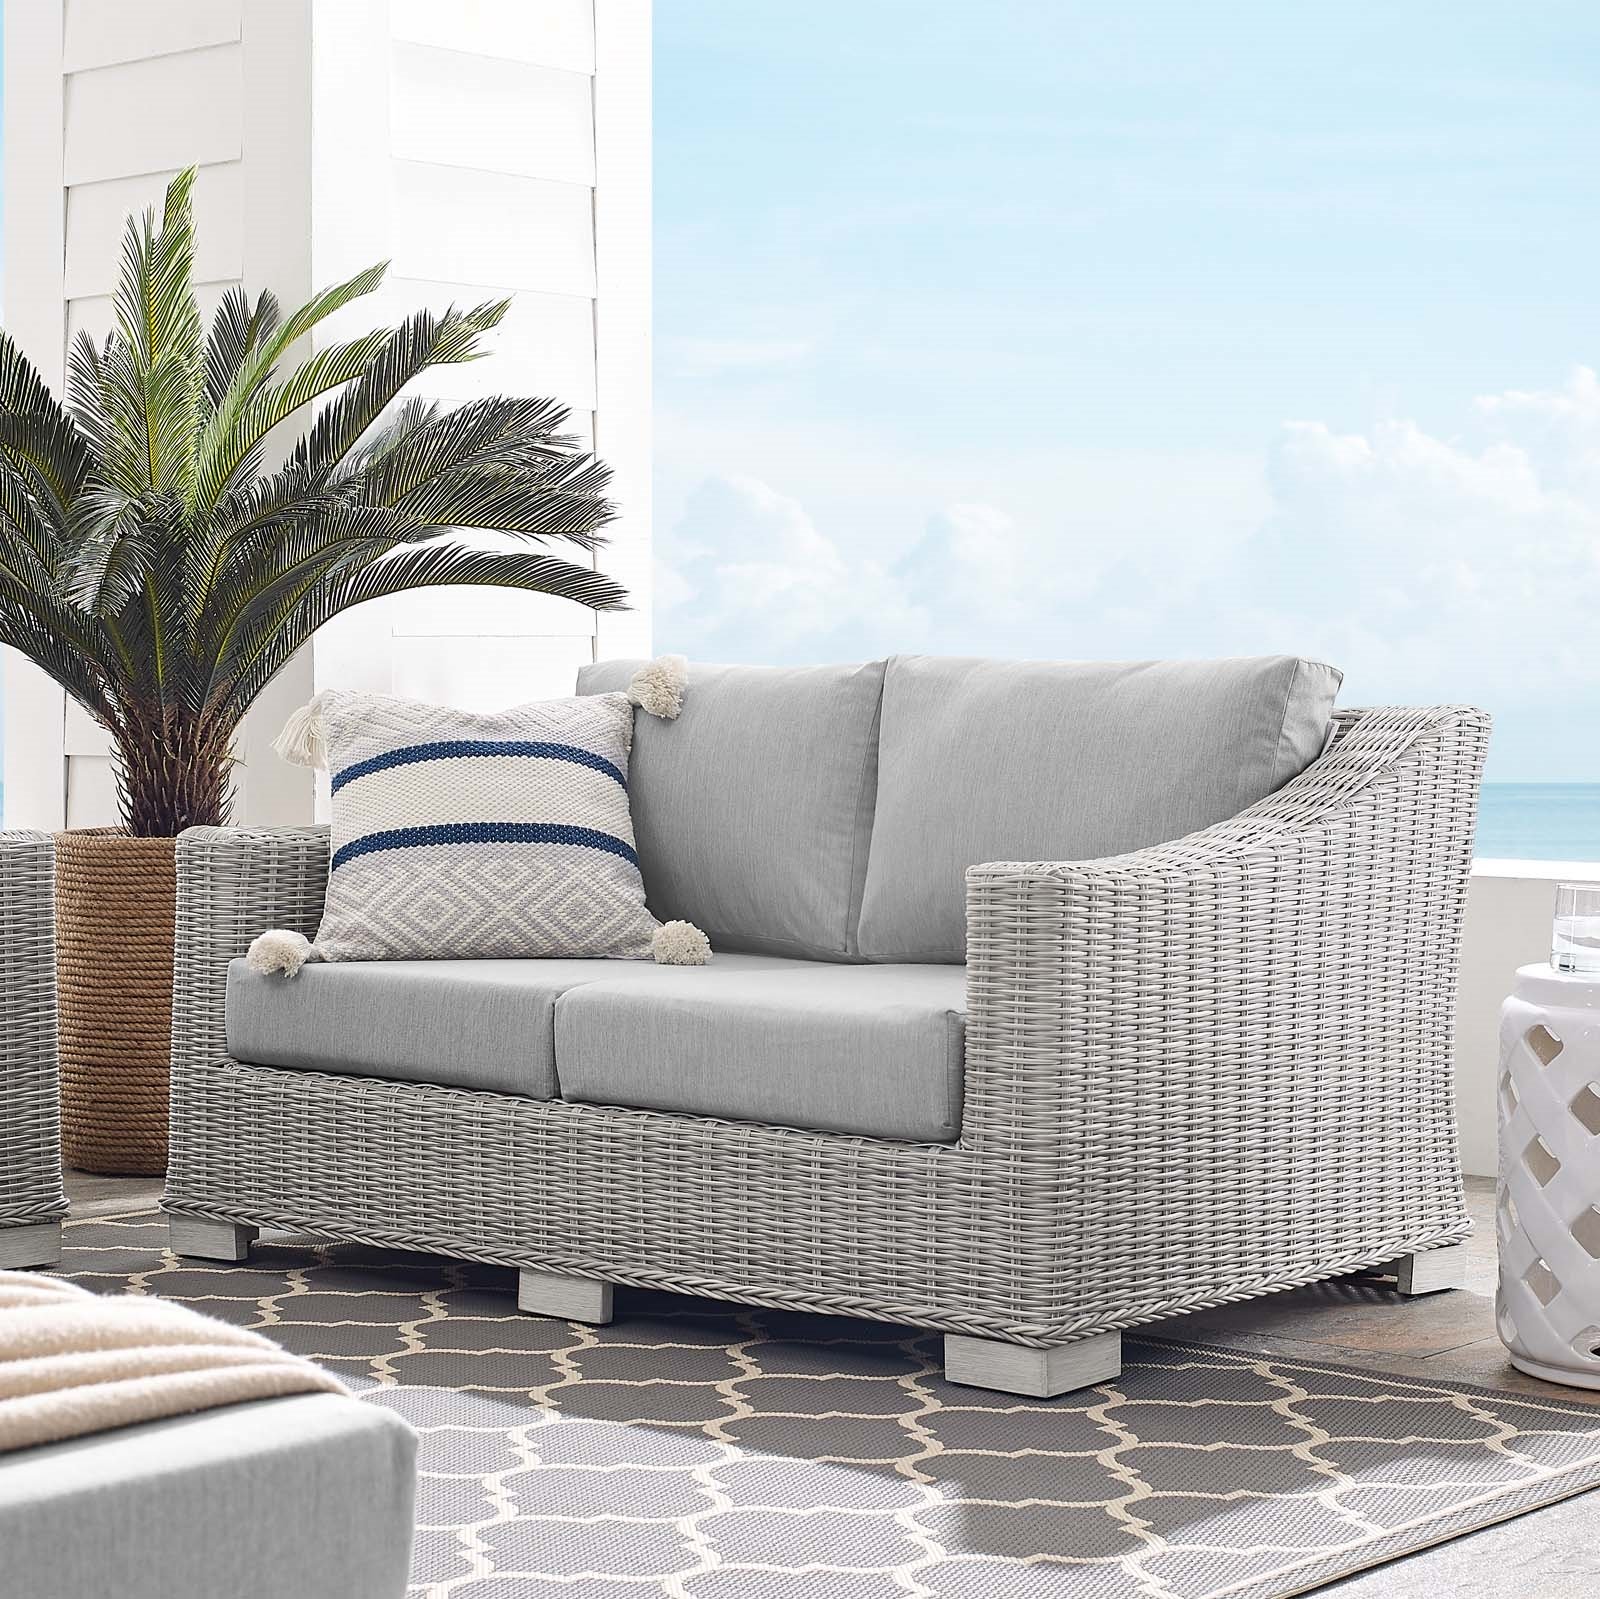 Conway Outdoor Patio Wicker Rattan Loveseat In Light Gray Gray Hyme